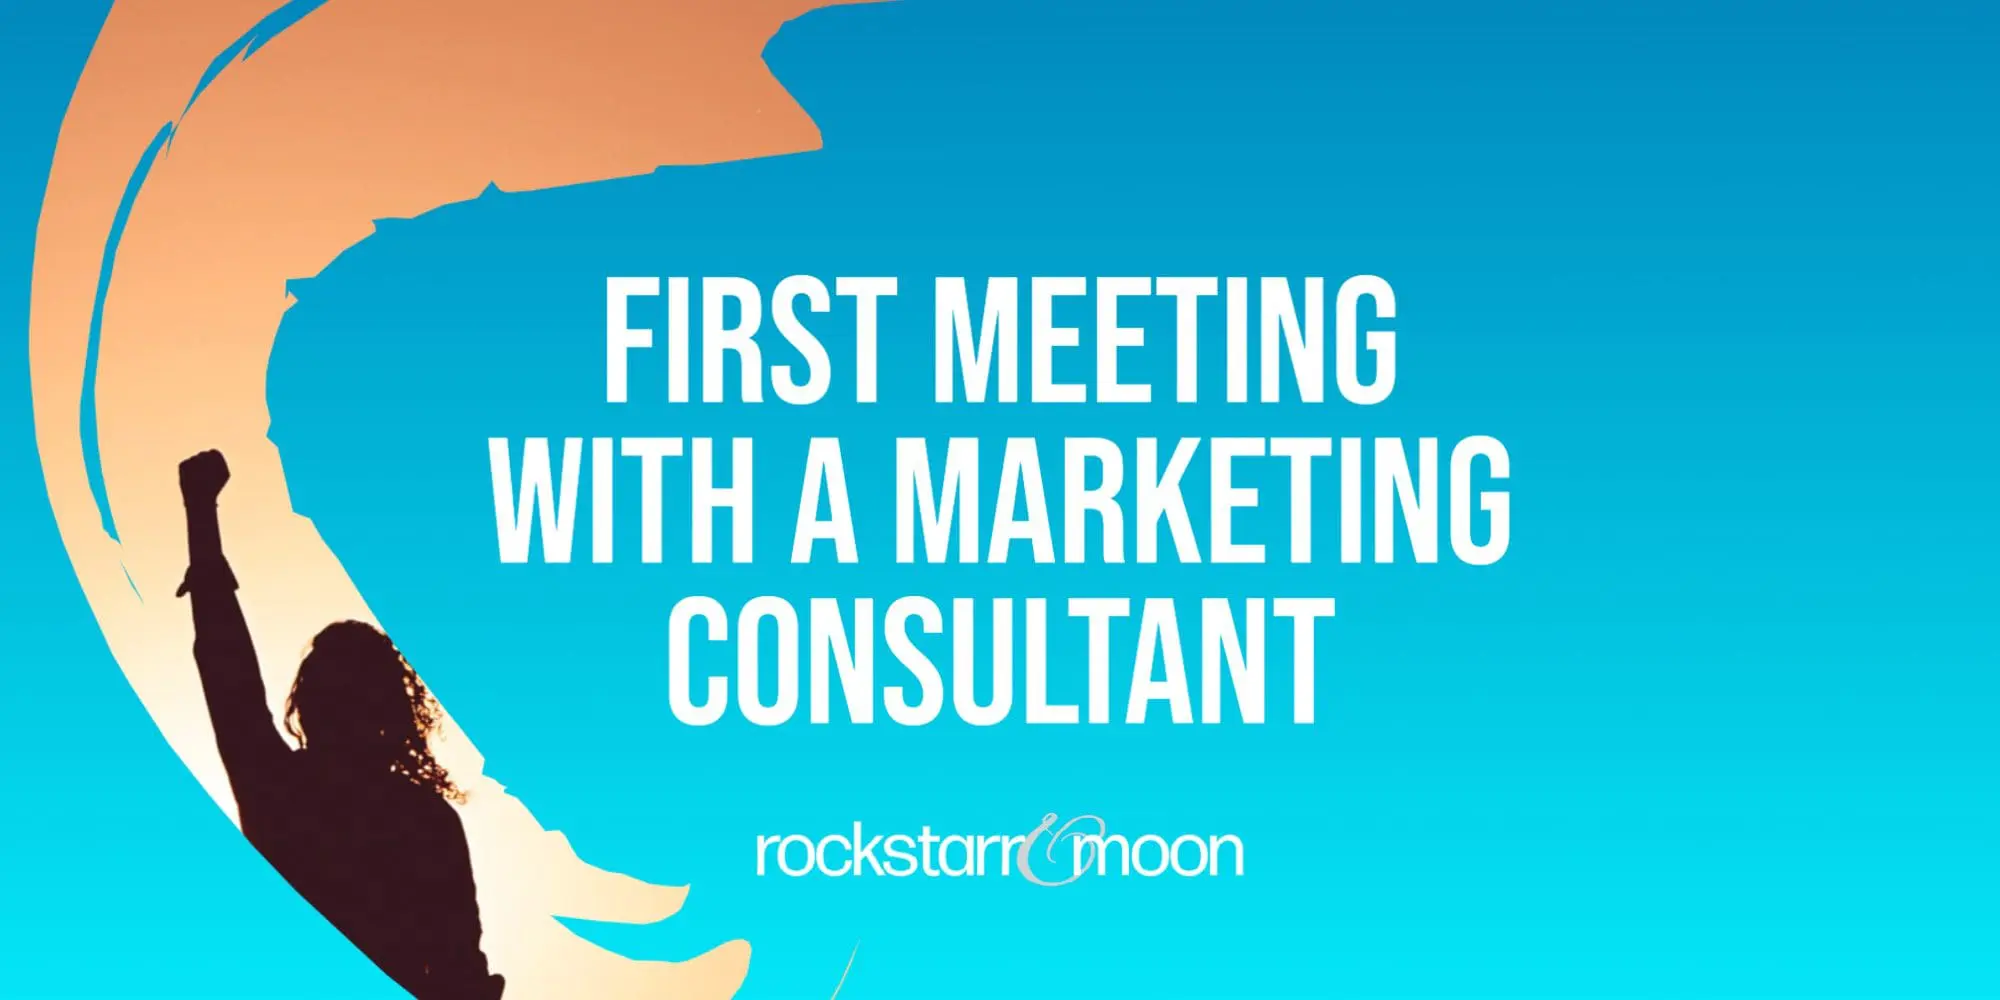 First Meeting With a Marketing Consultant